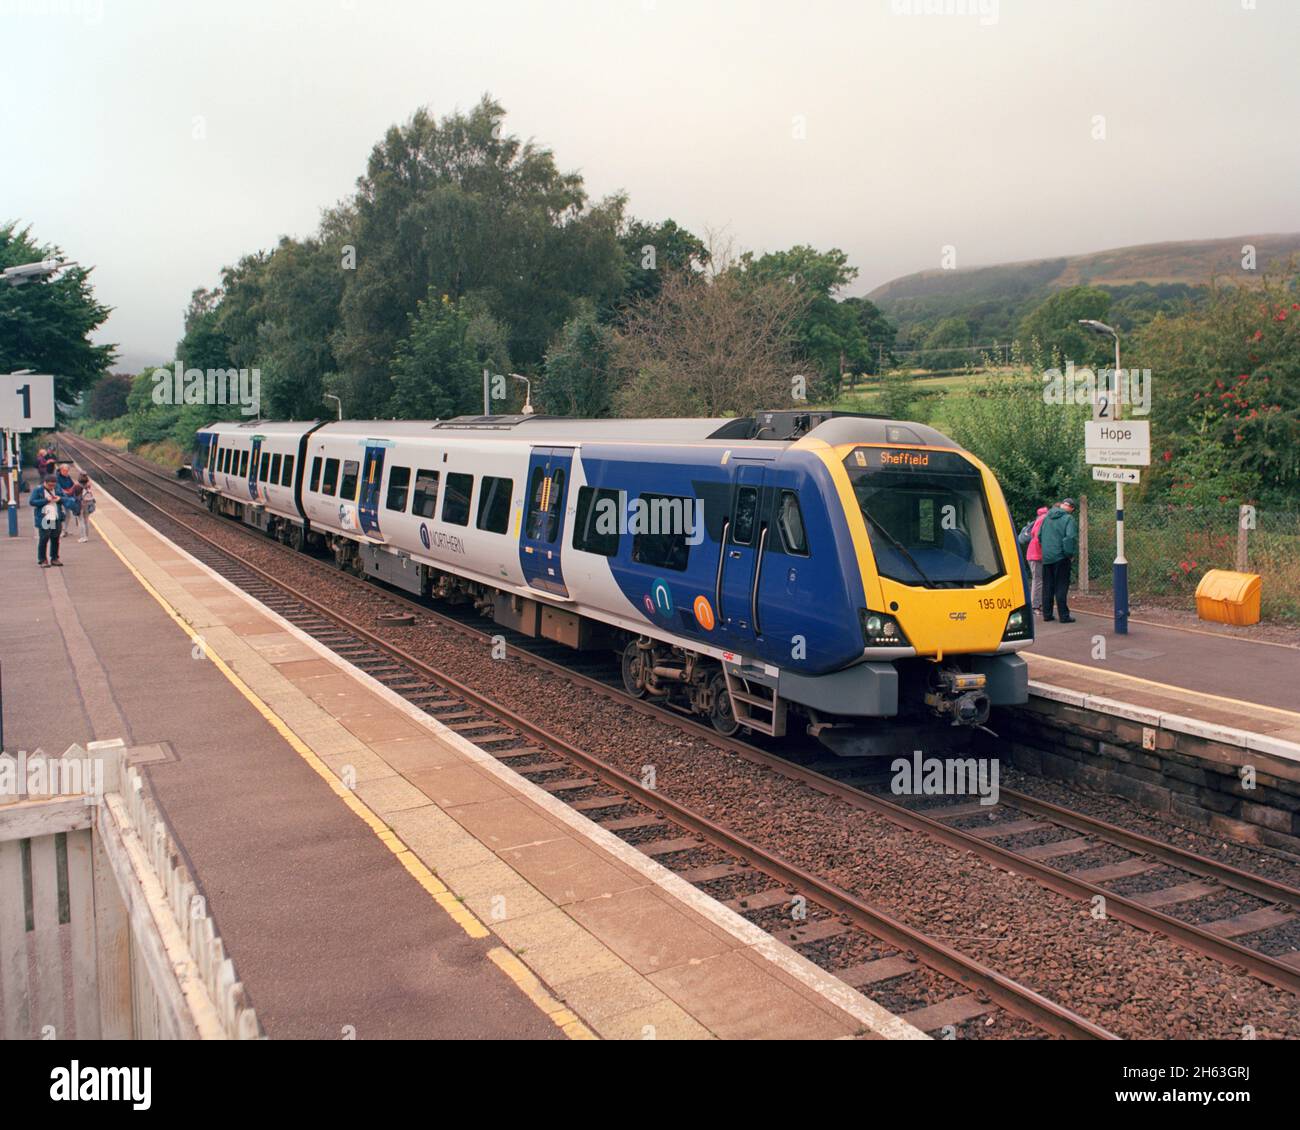 Hope, UK - 18 August 2021: A passenger train (Class 195) operated by Northern at Hope station. Stock Photo